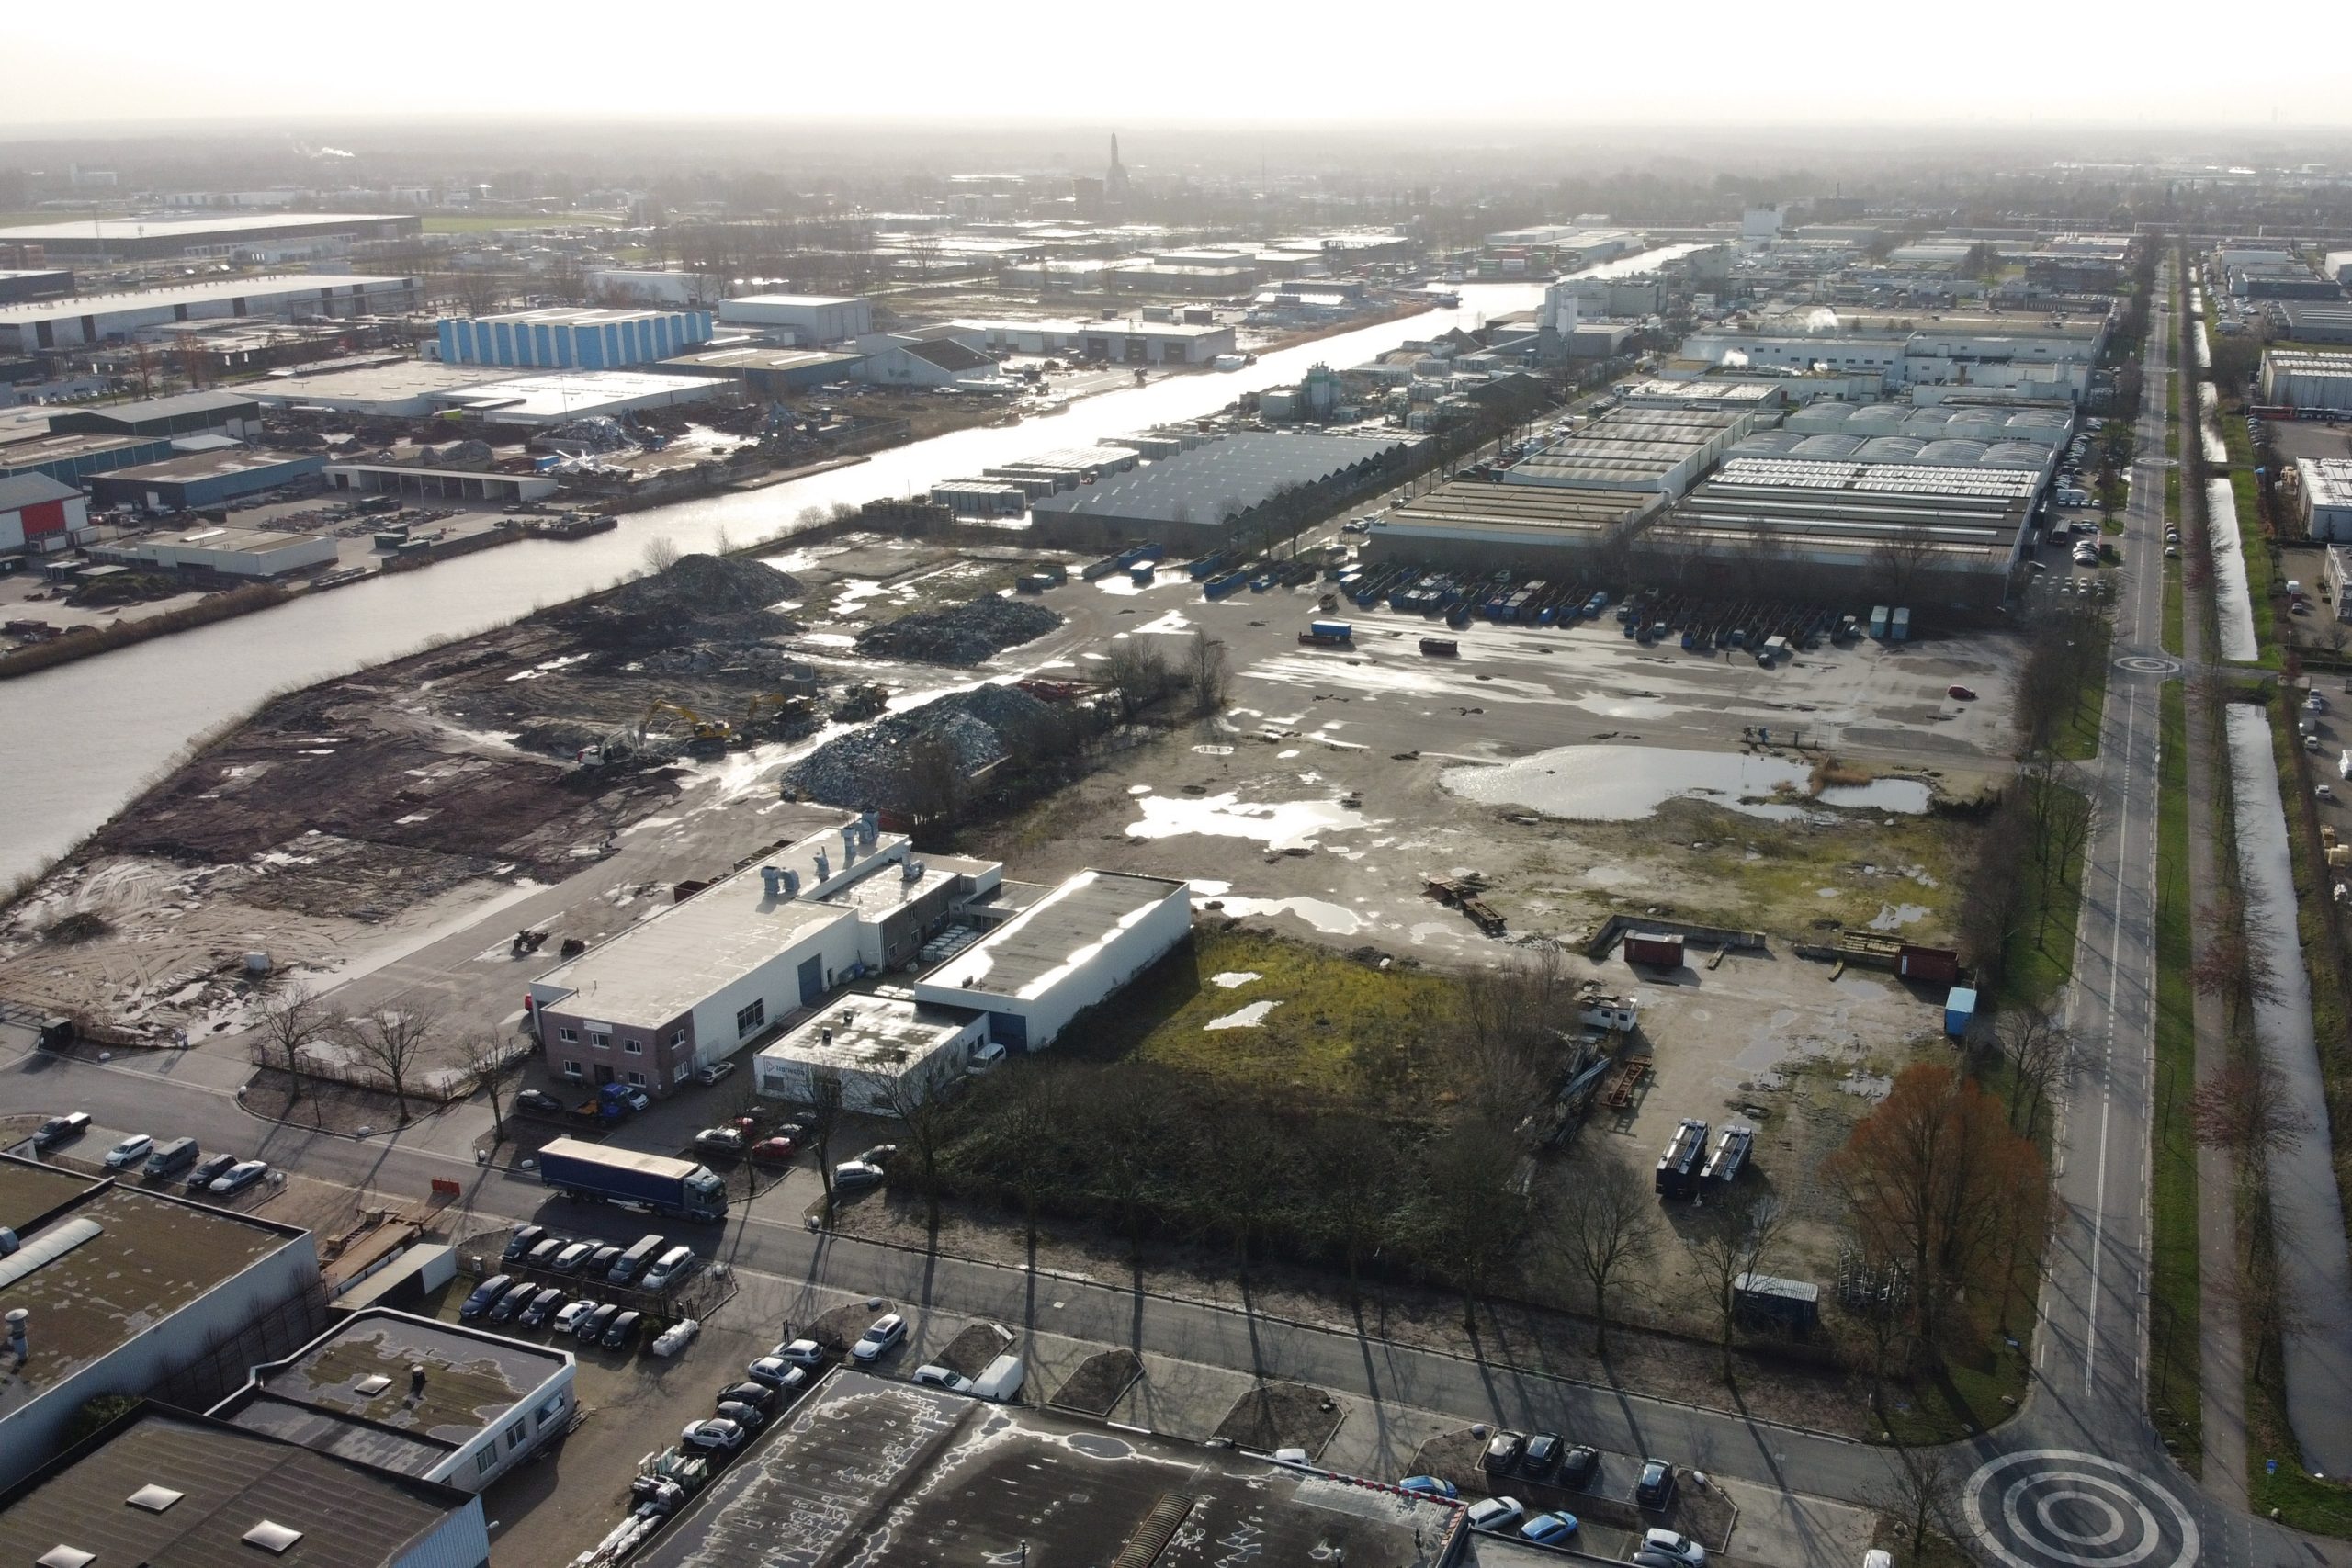 VDG Real Estate and Next Level acquire a plot of 15,440 sqm in Waalwijk to add to the 41,387 sqm already purchased.